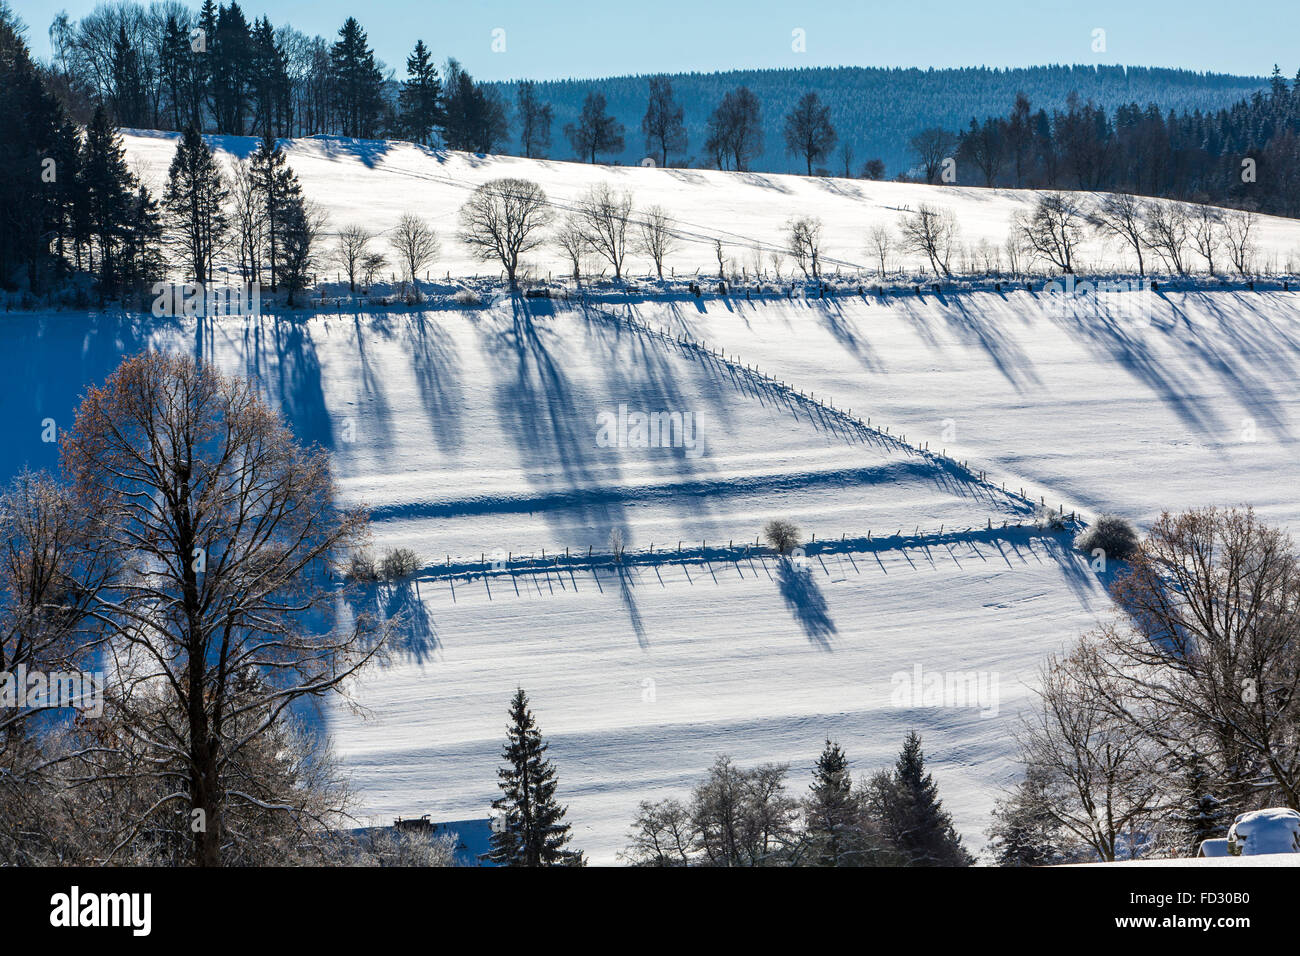 Winter, snowy landscape in the Sauerland area, Germany, Stock Photo